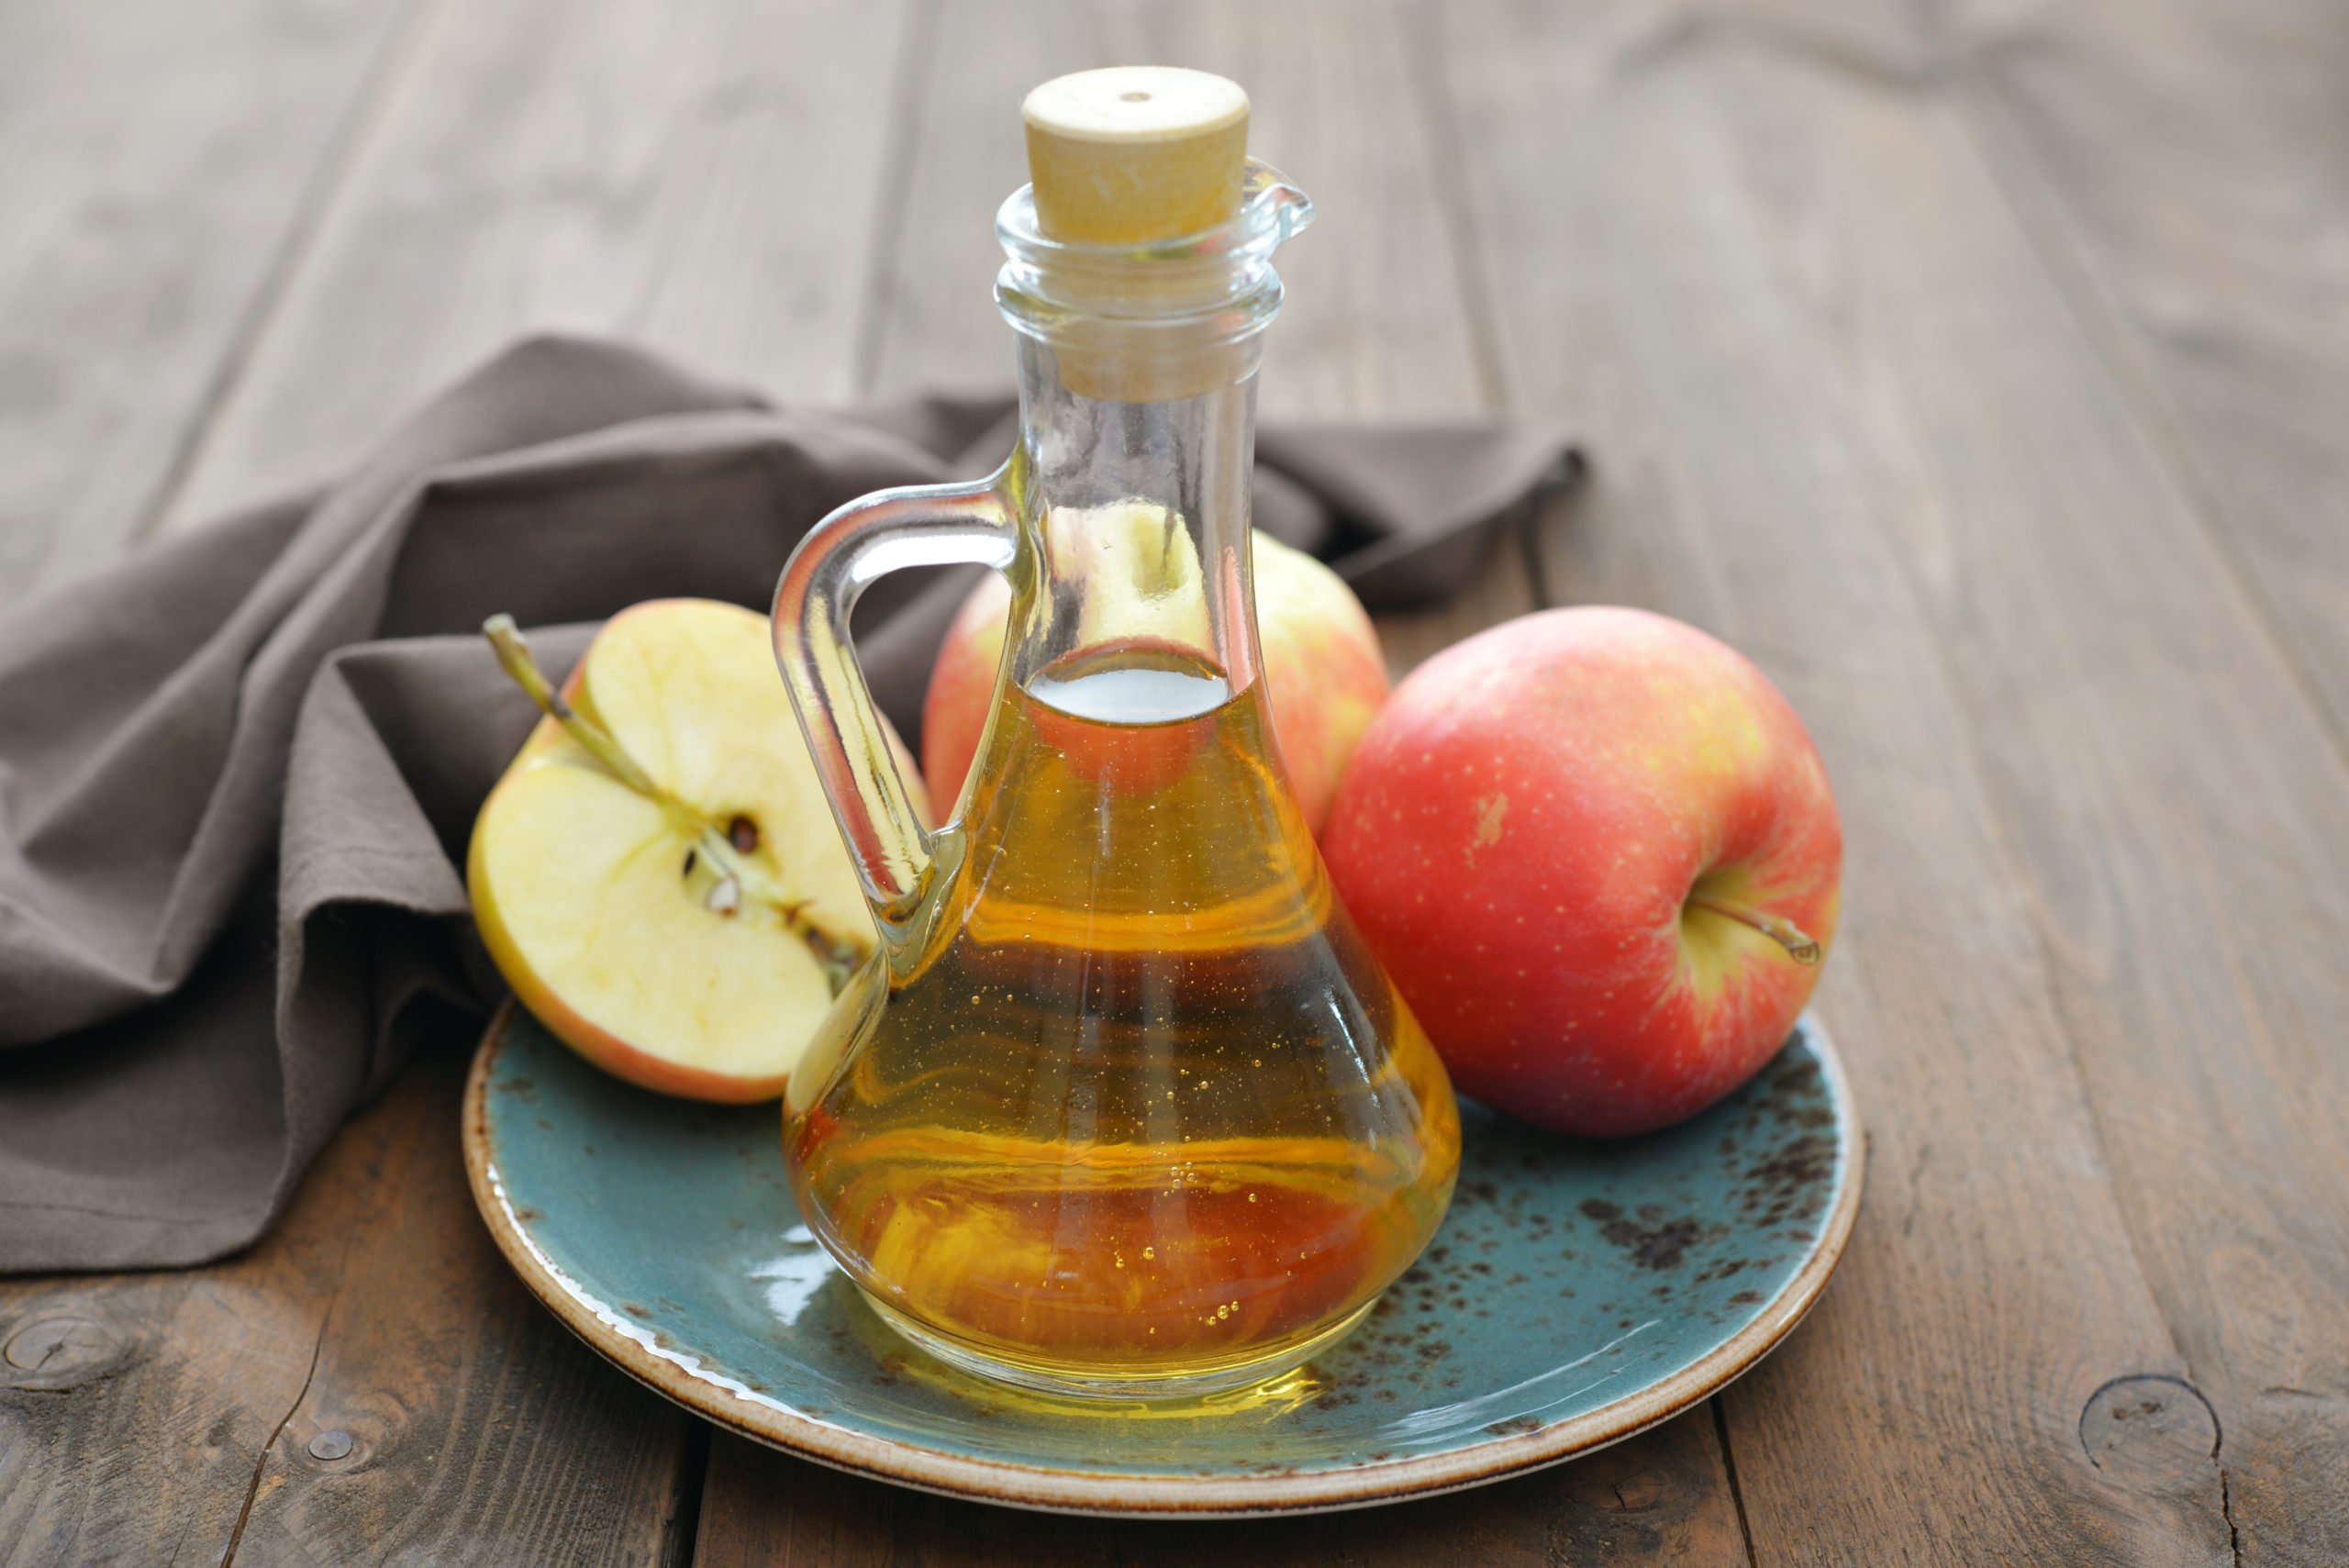 Levels community experiment: Can apple cider vinegar reduce blood sugar spikes?